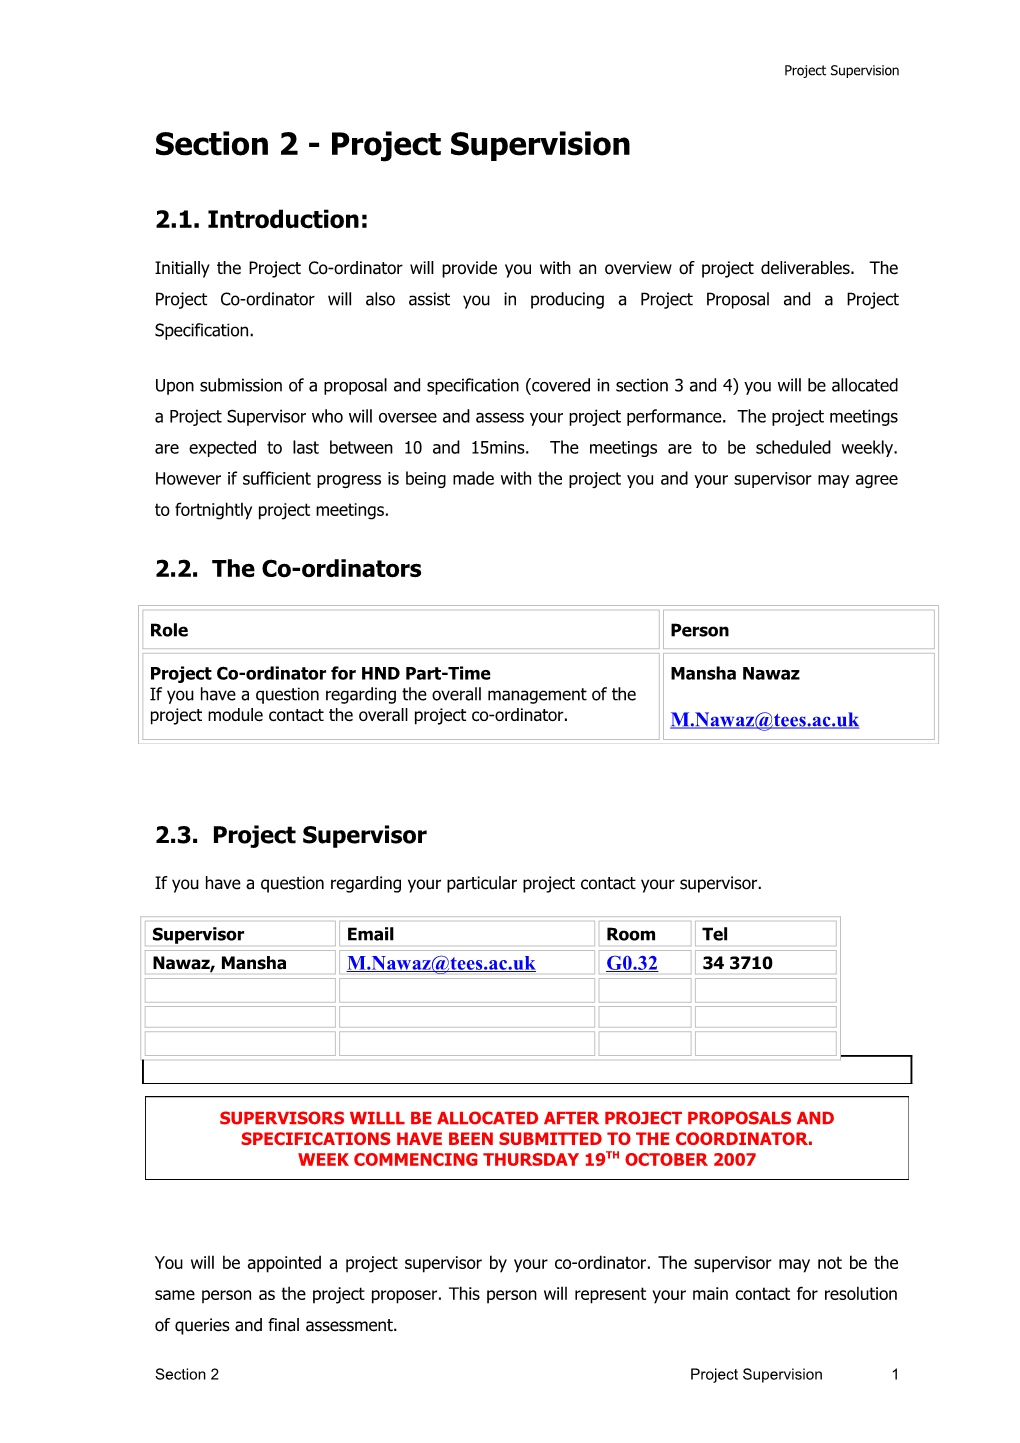 Section 2 - Project Supervision